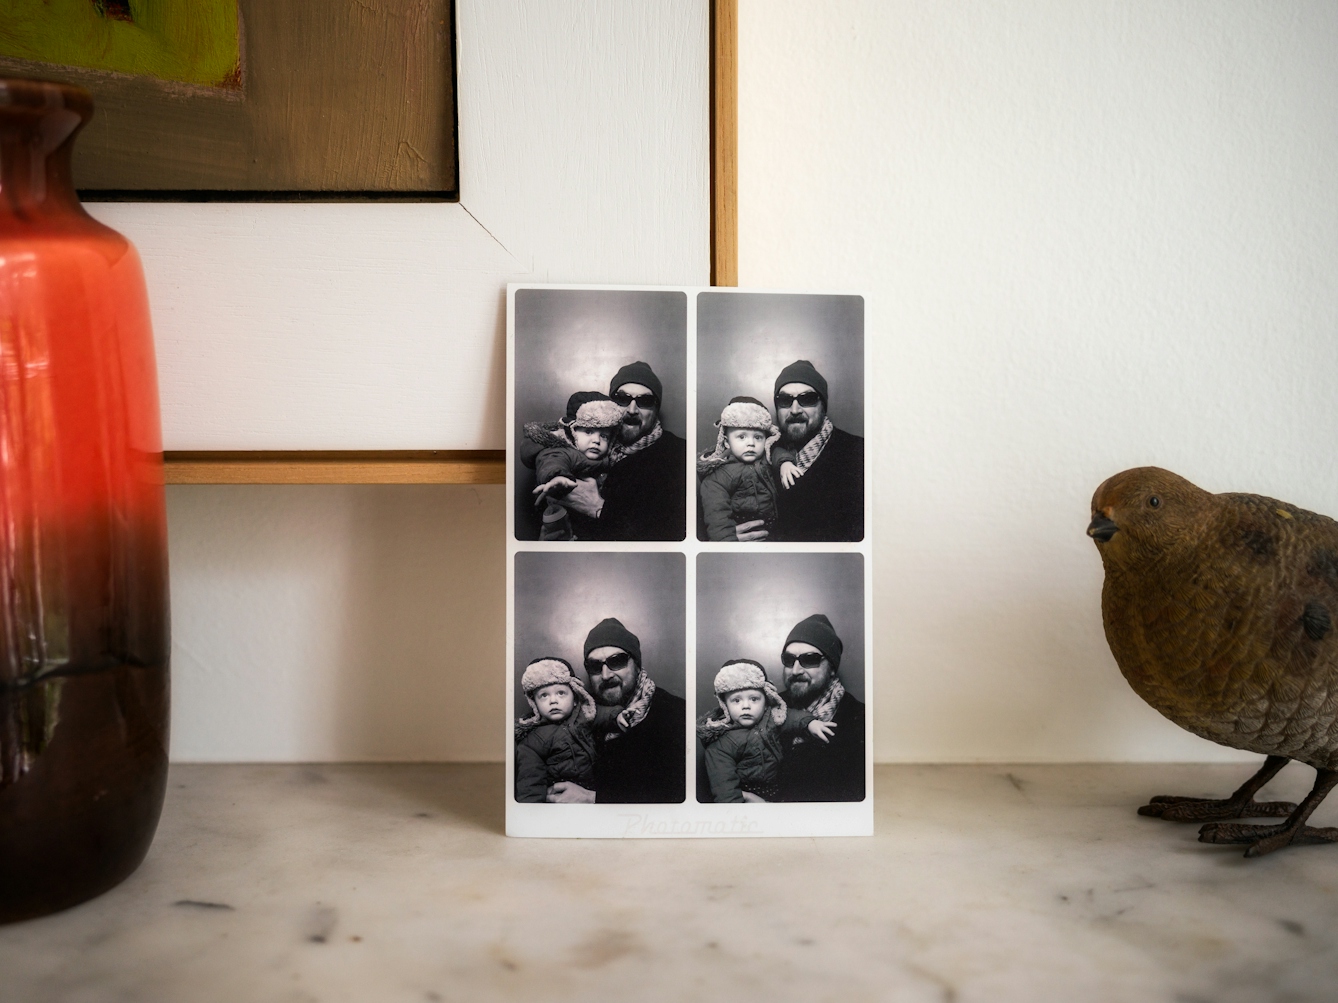 Photograph of a section of tabletop against a white wall. A set of passport four sized pictures from a photo booth are leaning against the bottom right corner of a framed picture hanging on the wall. The passport photos show a man in a hat with sunglasses holding a child who is looking directly at the camera. To the right of the print is an ornamental bird appearing into frame. To the left is a section of a red coloured ceramic vase also just appearing into frame.